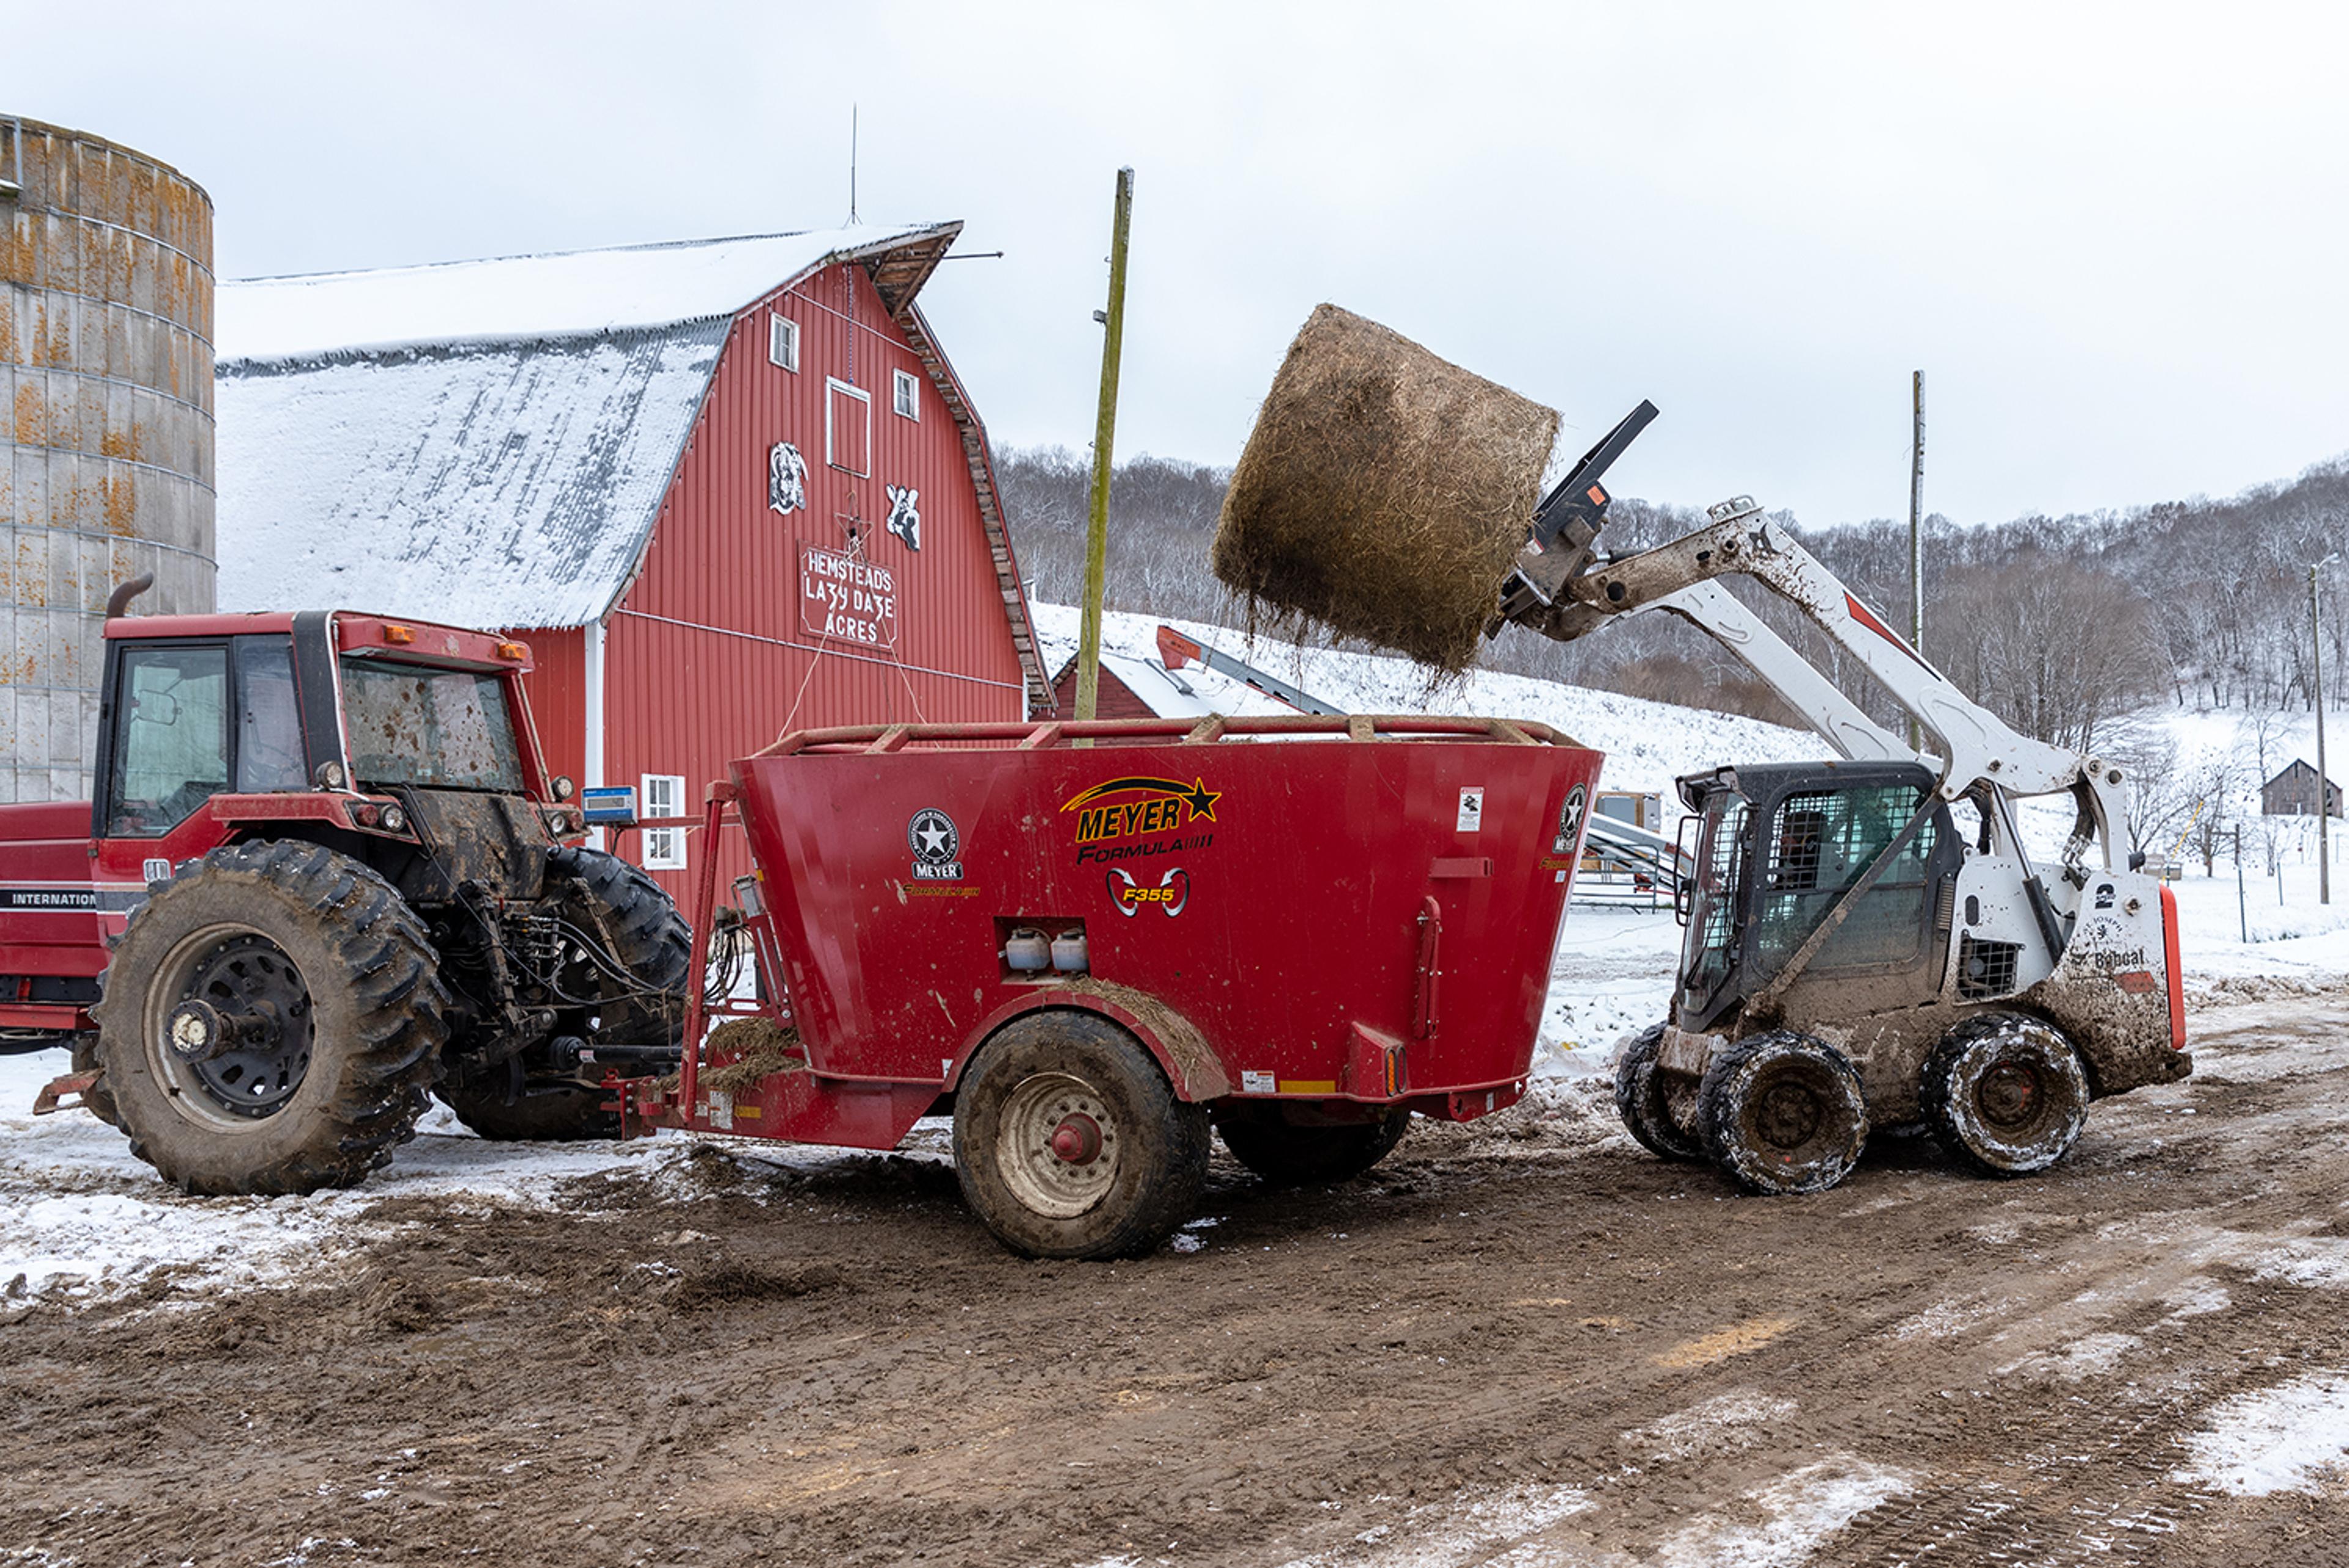 A farmer uses a Bobcat to load a round bale of hay into a trailer pulled by a big tractor. 